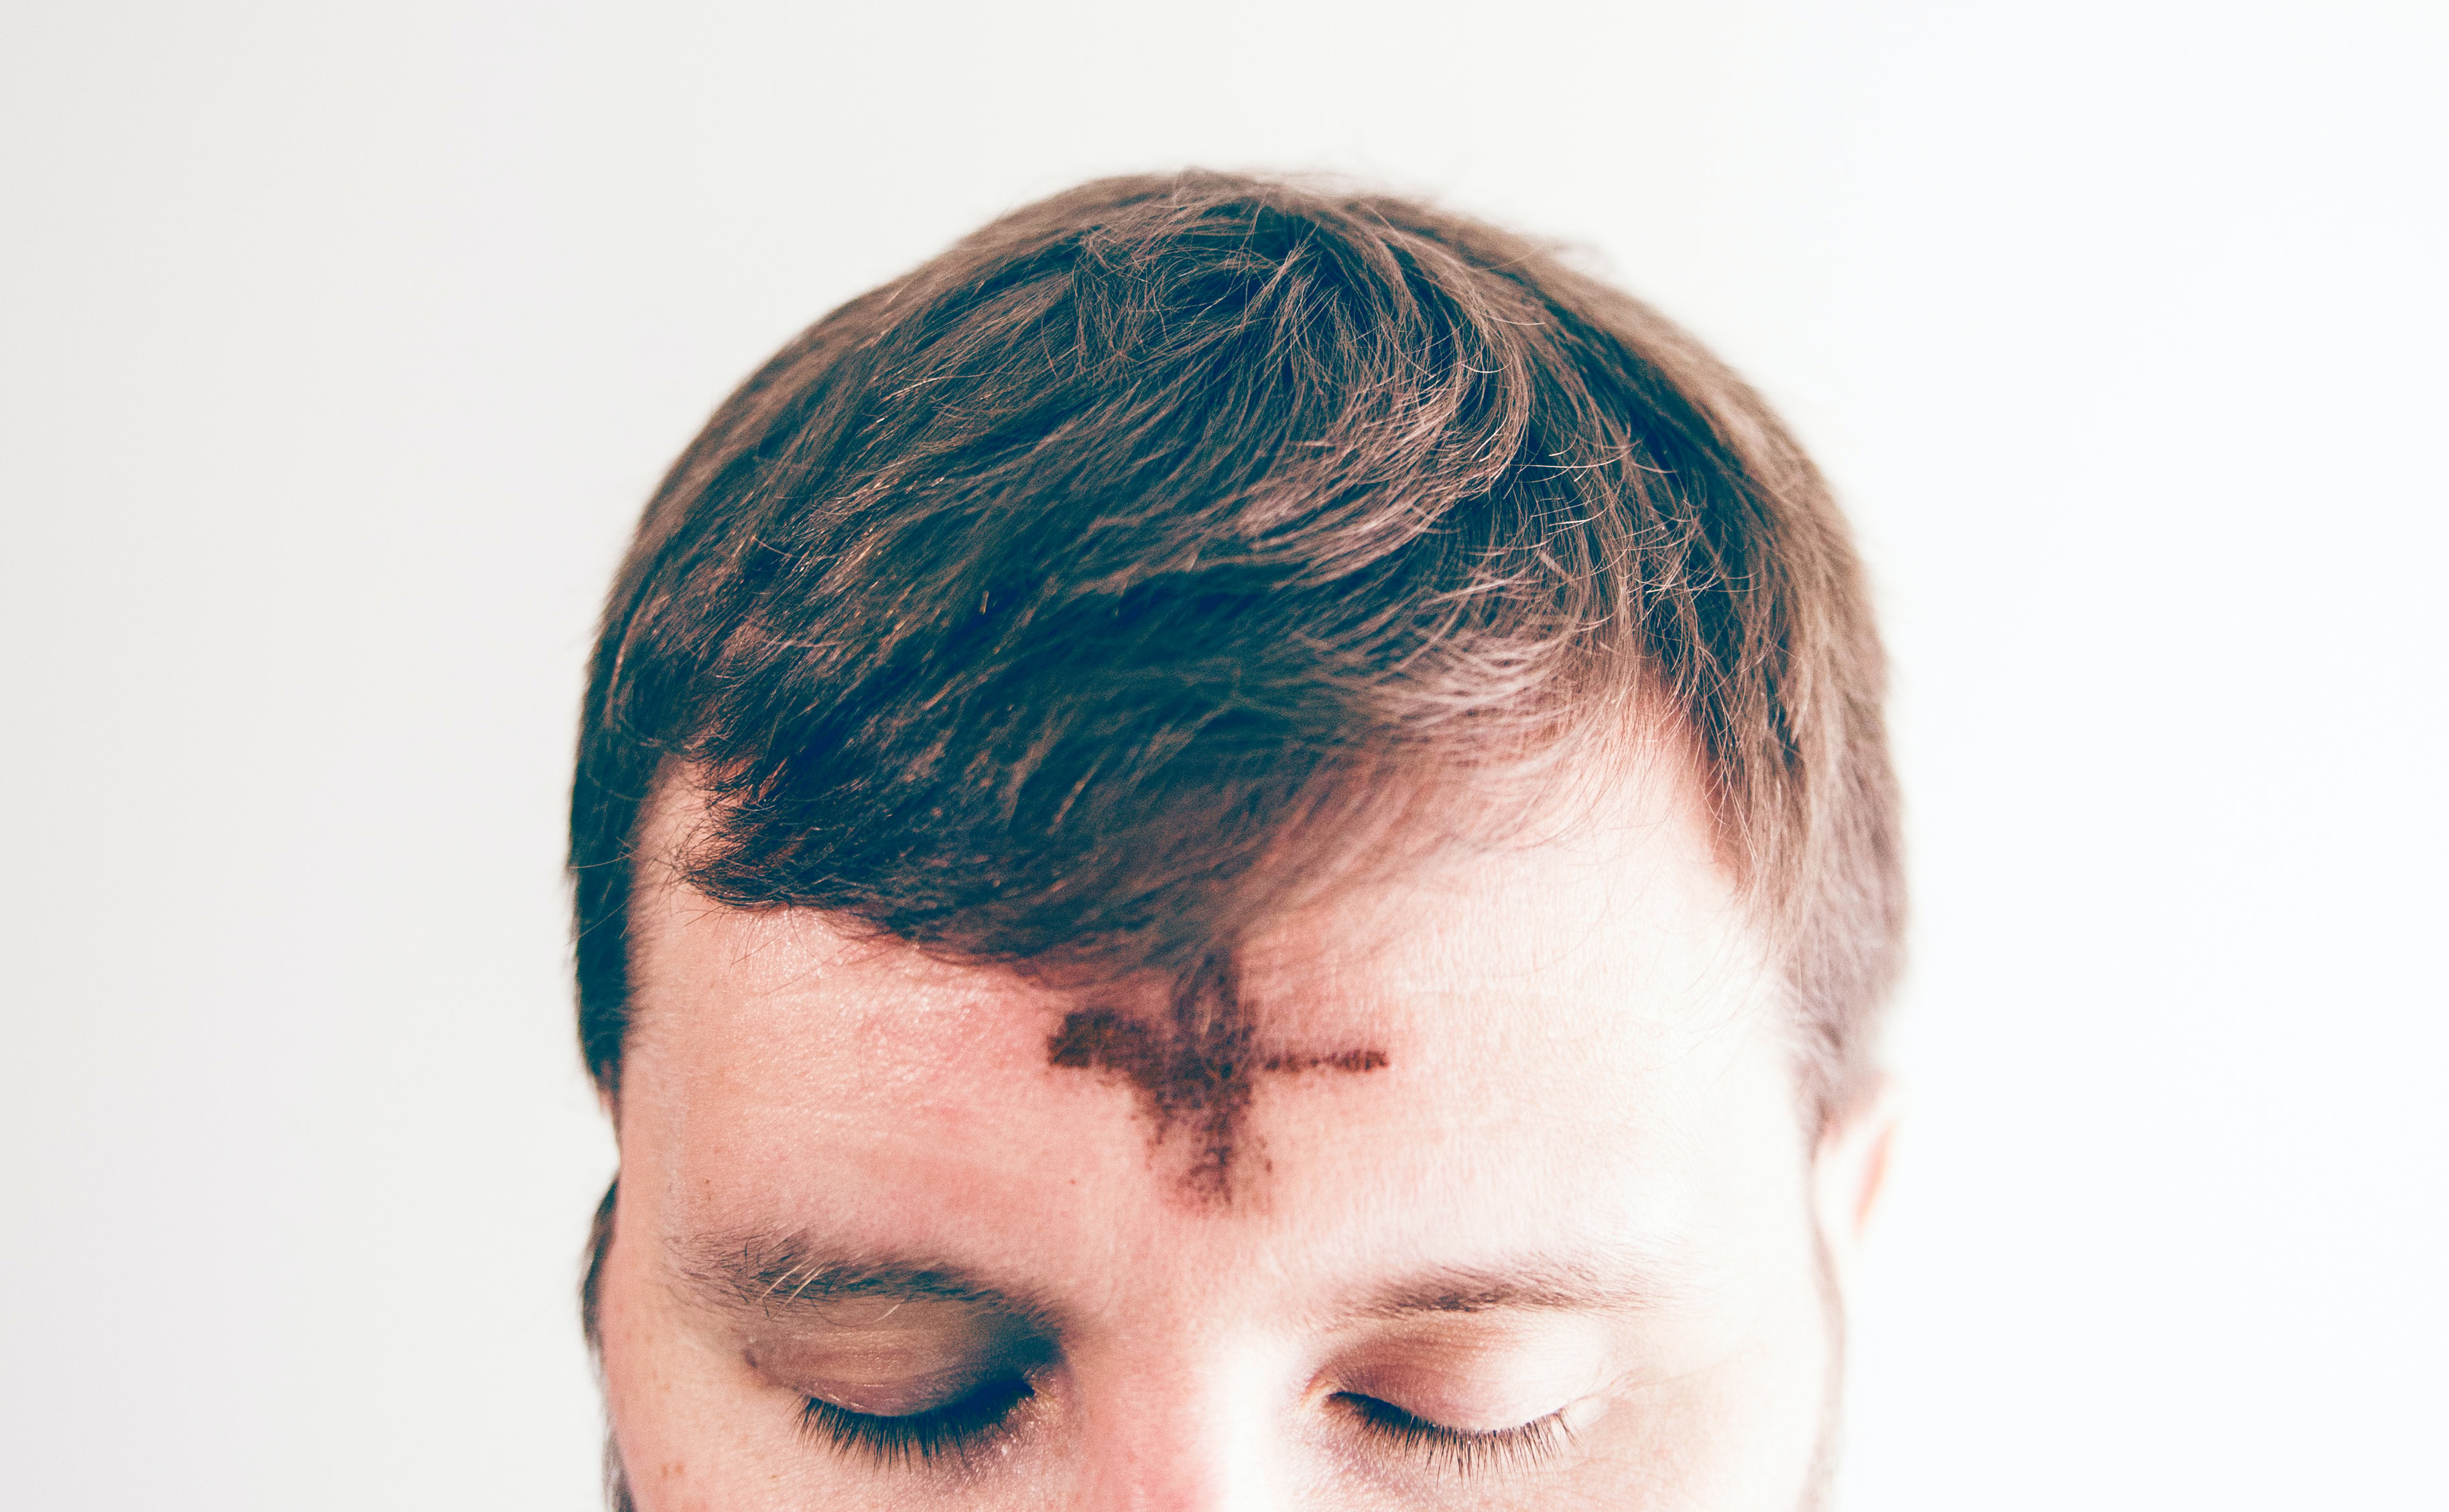 Man with Ashes on forehead